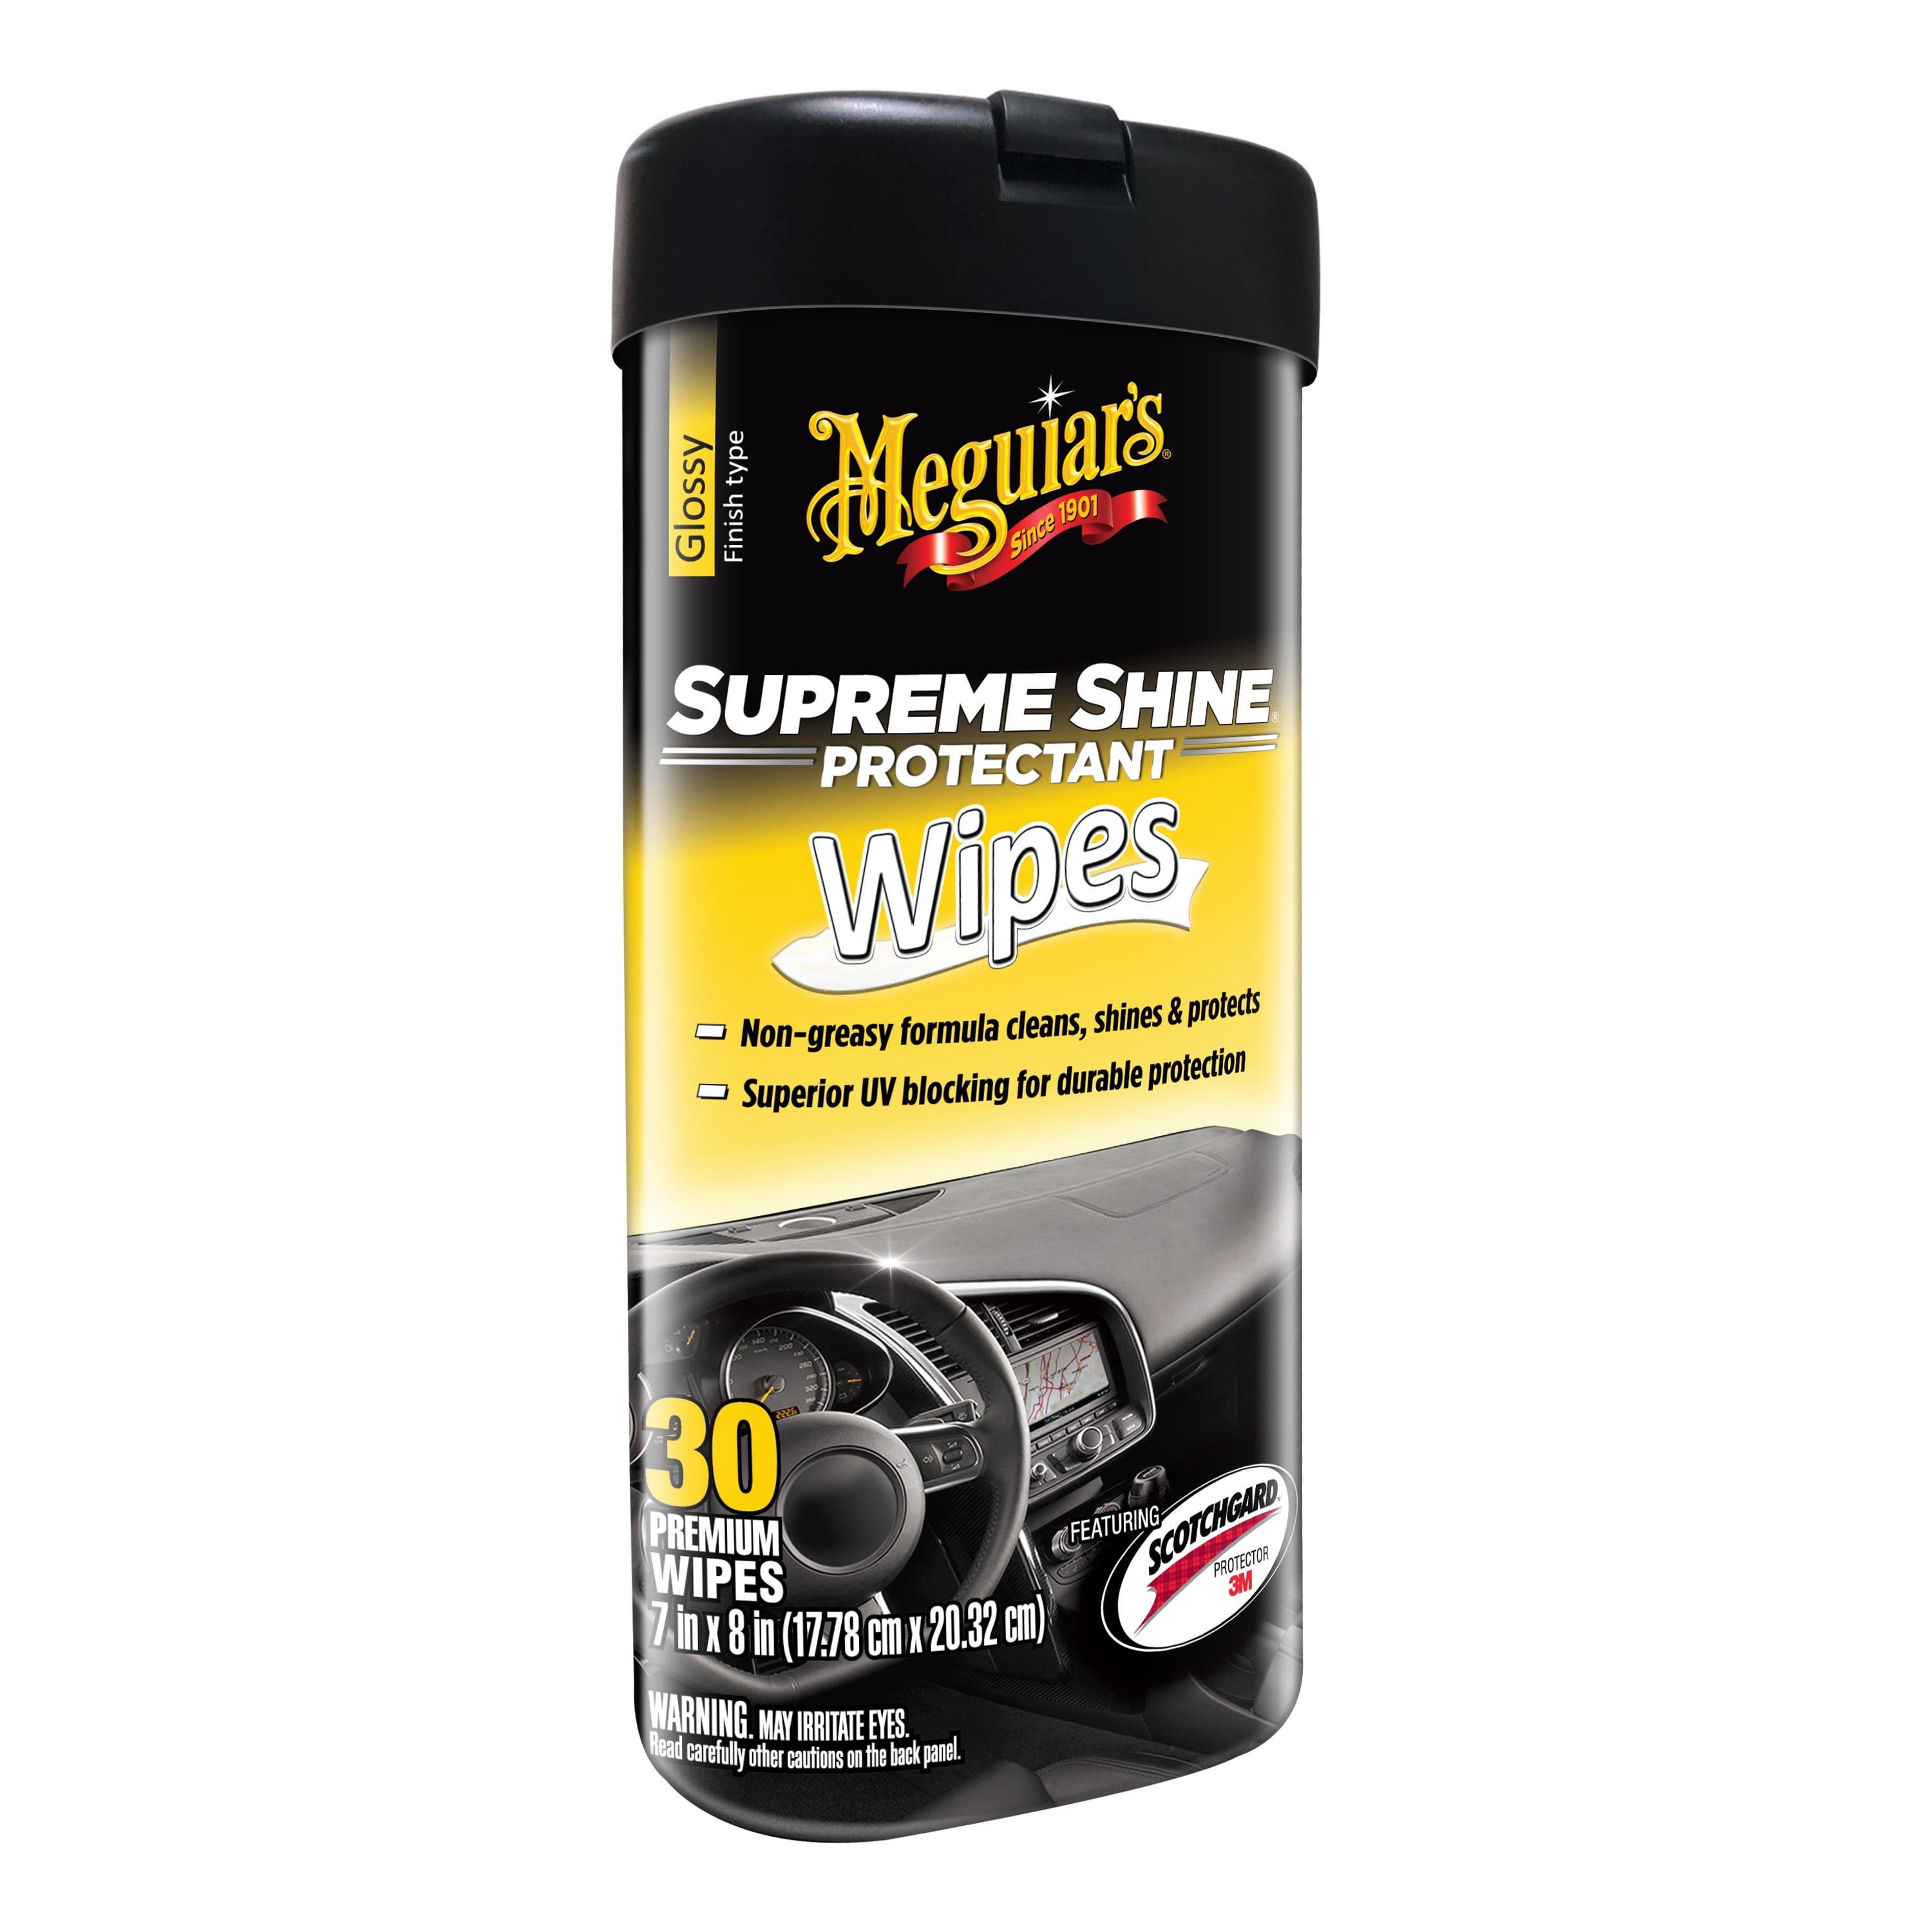 Meguiar's Quik Detailer, Mist & Wipe Car Detailing Spray, Clear Light  Contaminants and Boost Shine with a Quick Detailer Spray that Keeps Paint  and Wax Looking Like New, 32 oz. 